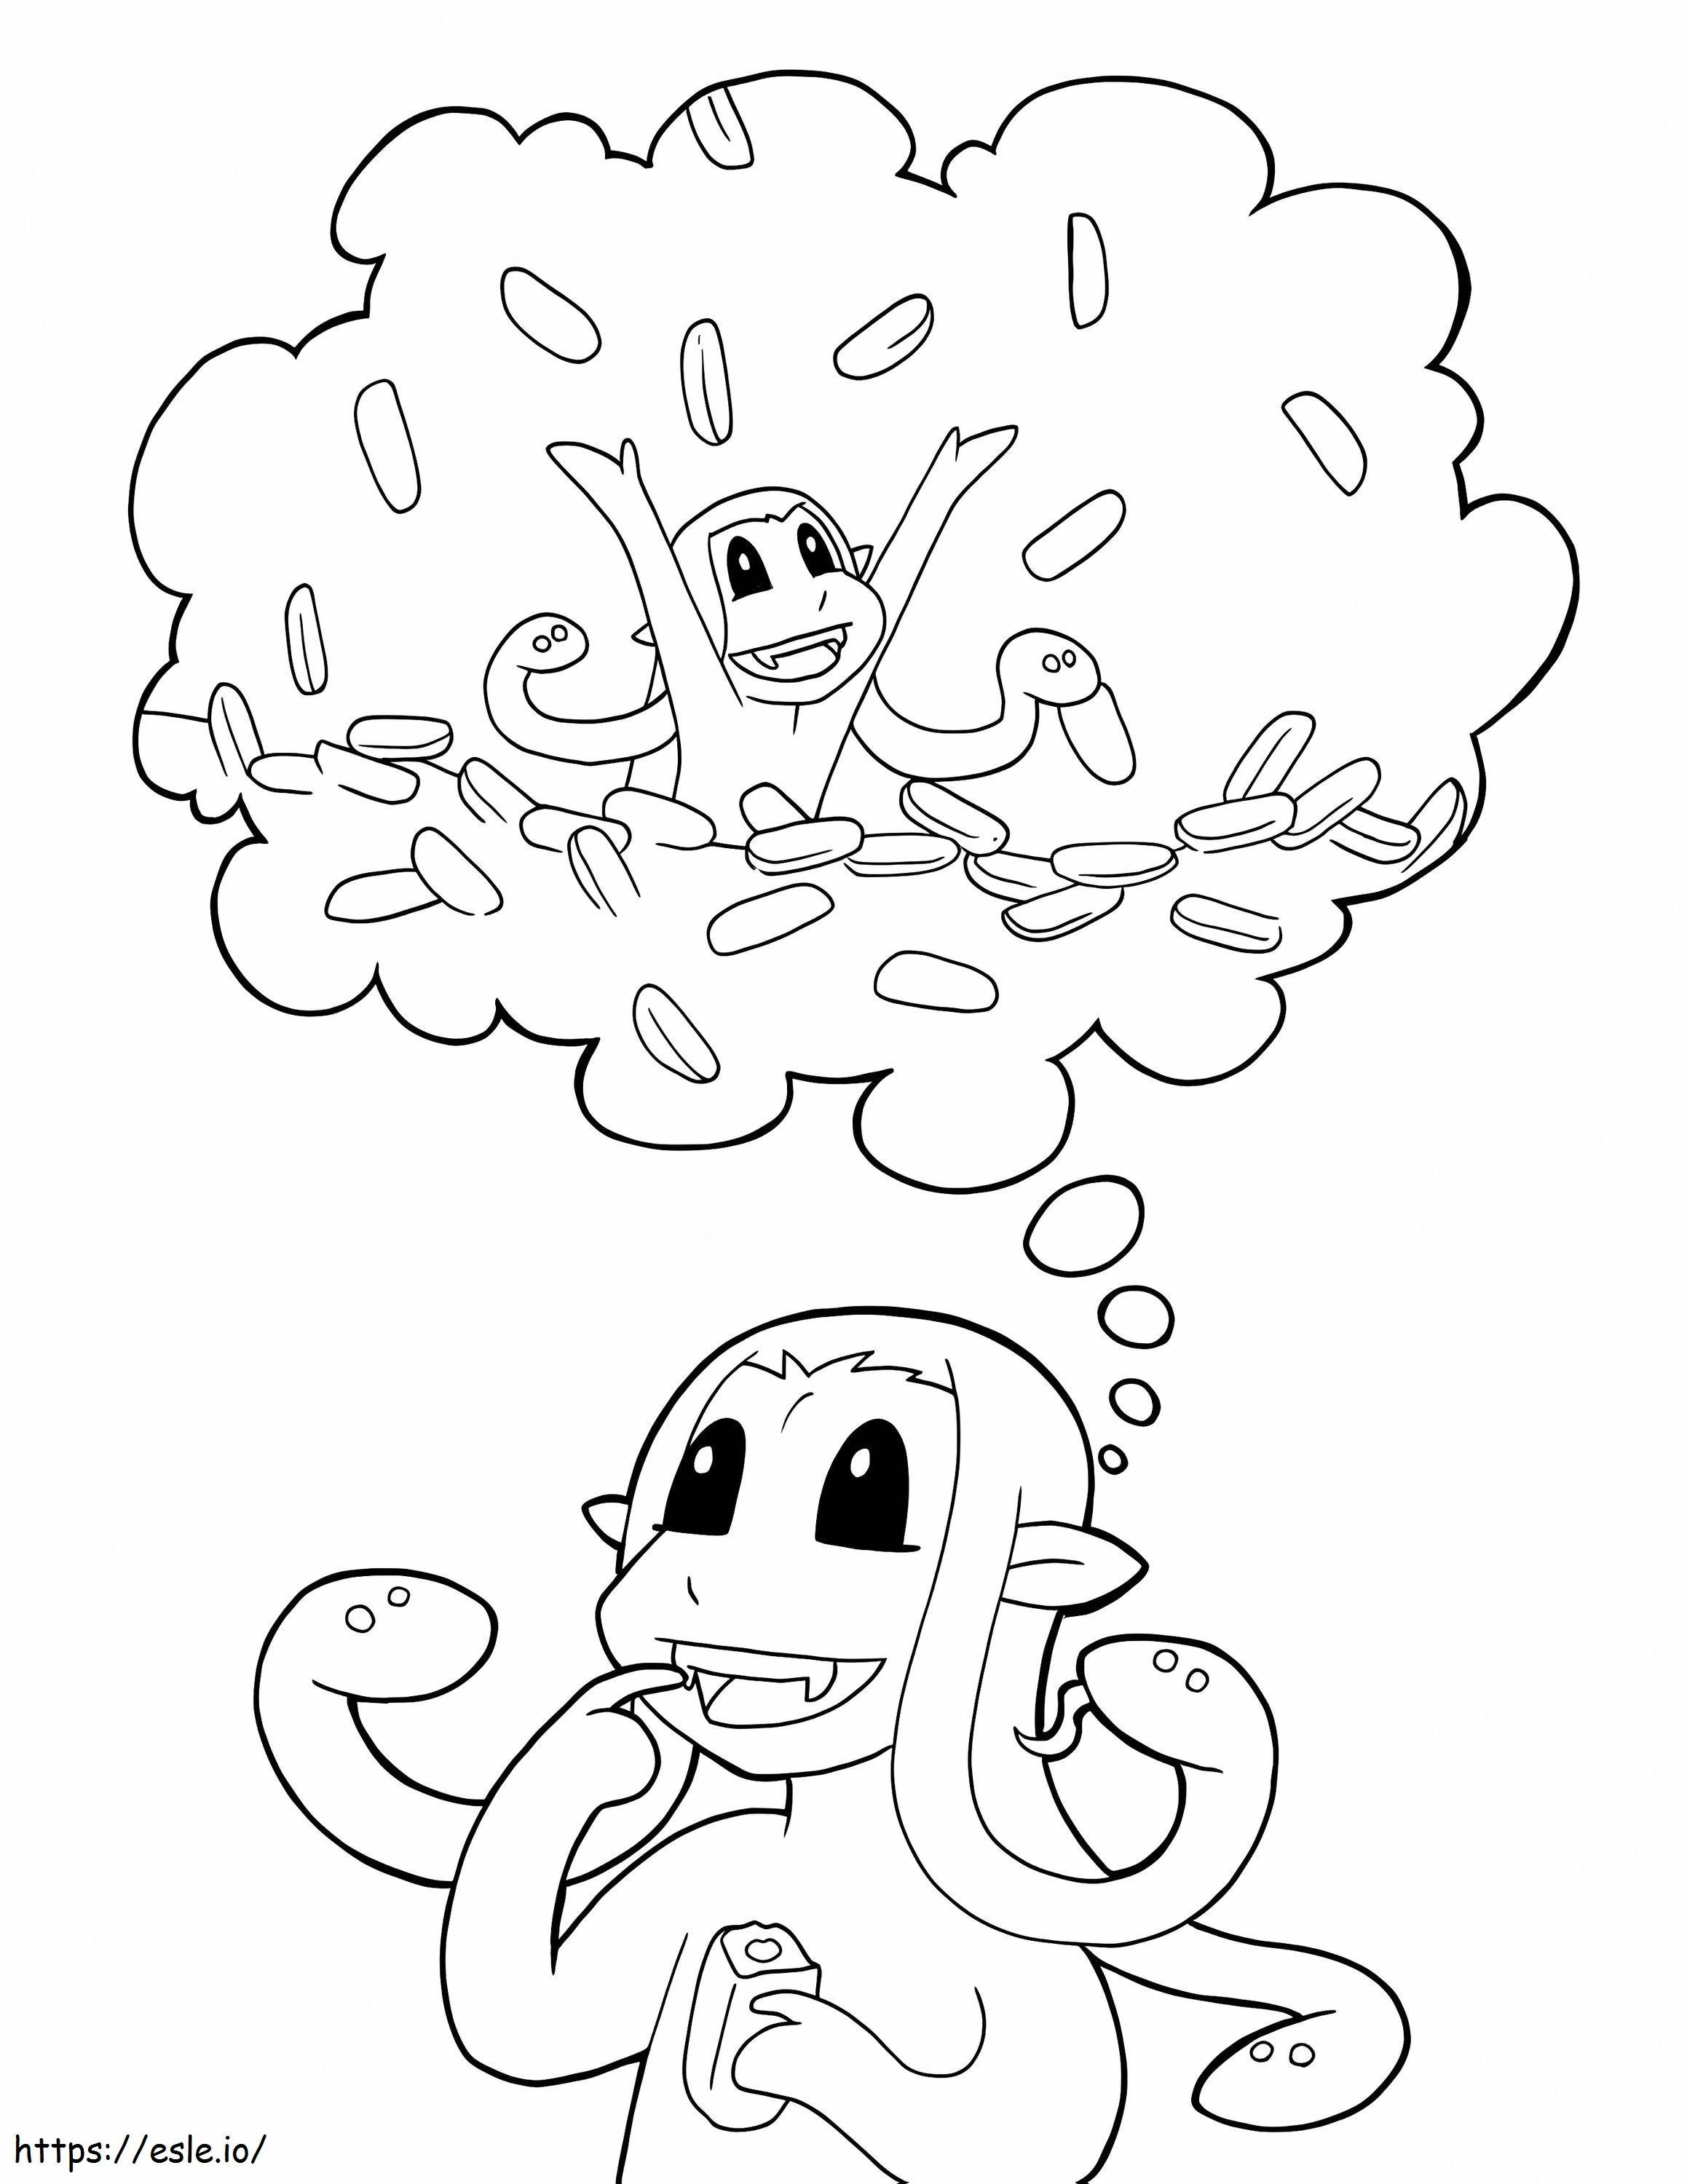 Cute Jellyfish coloring page